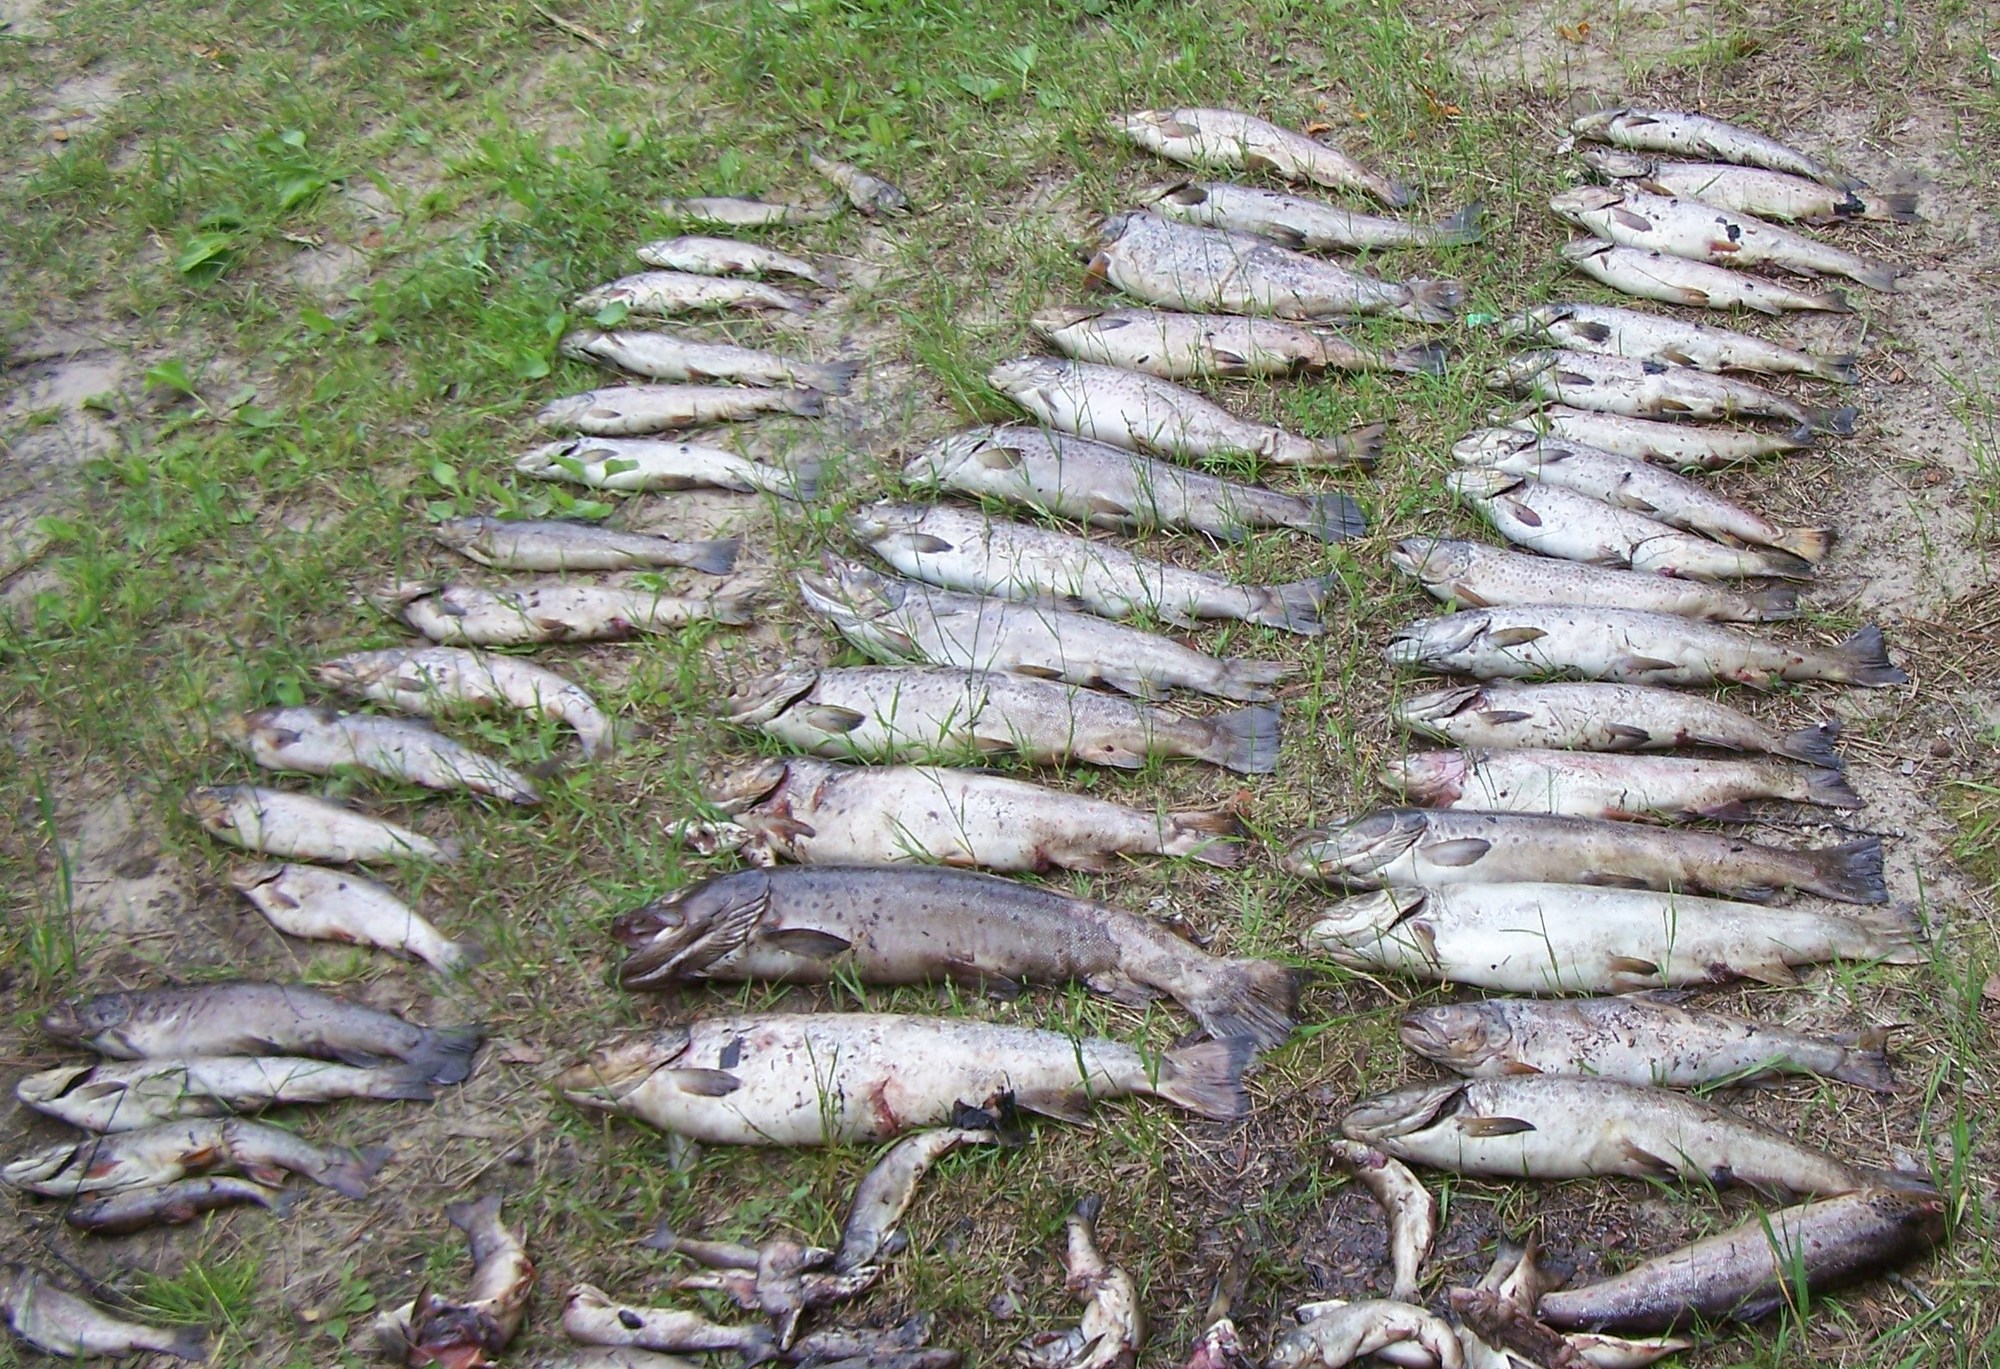 Forty trout over 12 inches and 18 fish over 15 inches, part of the fish kill downstream of the dam on the Pigeon River in June 2008.